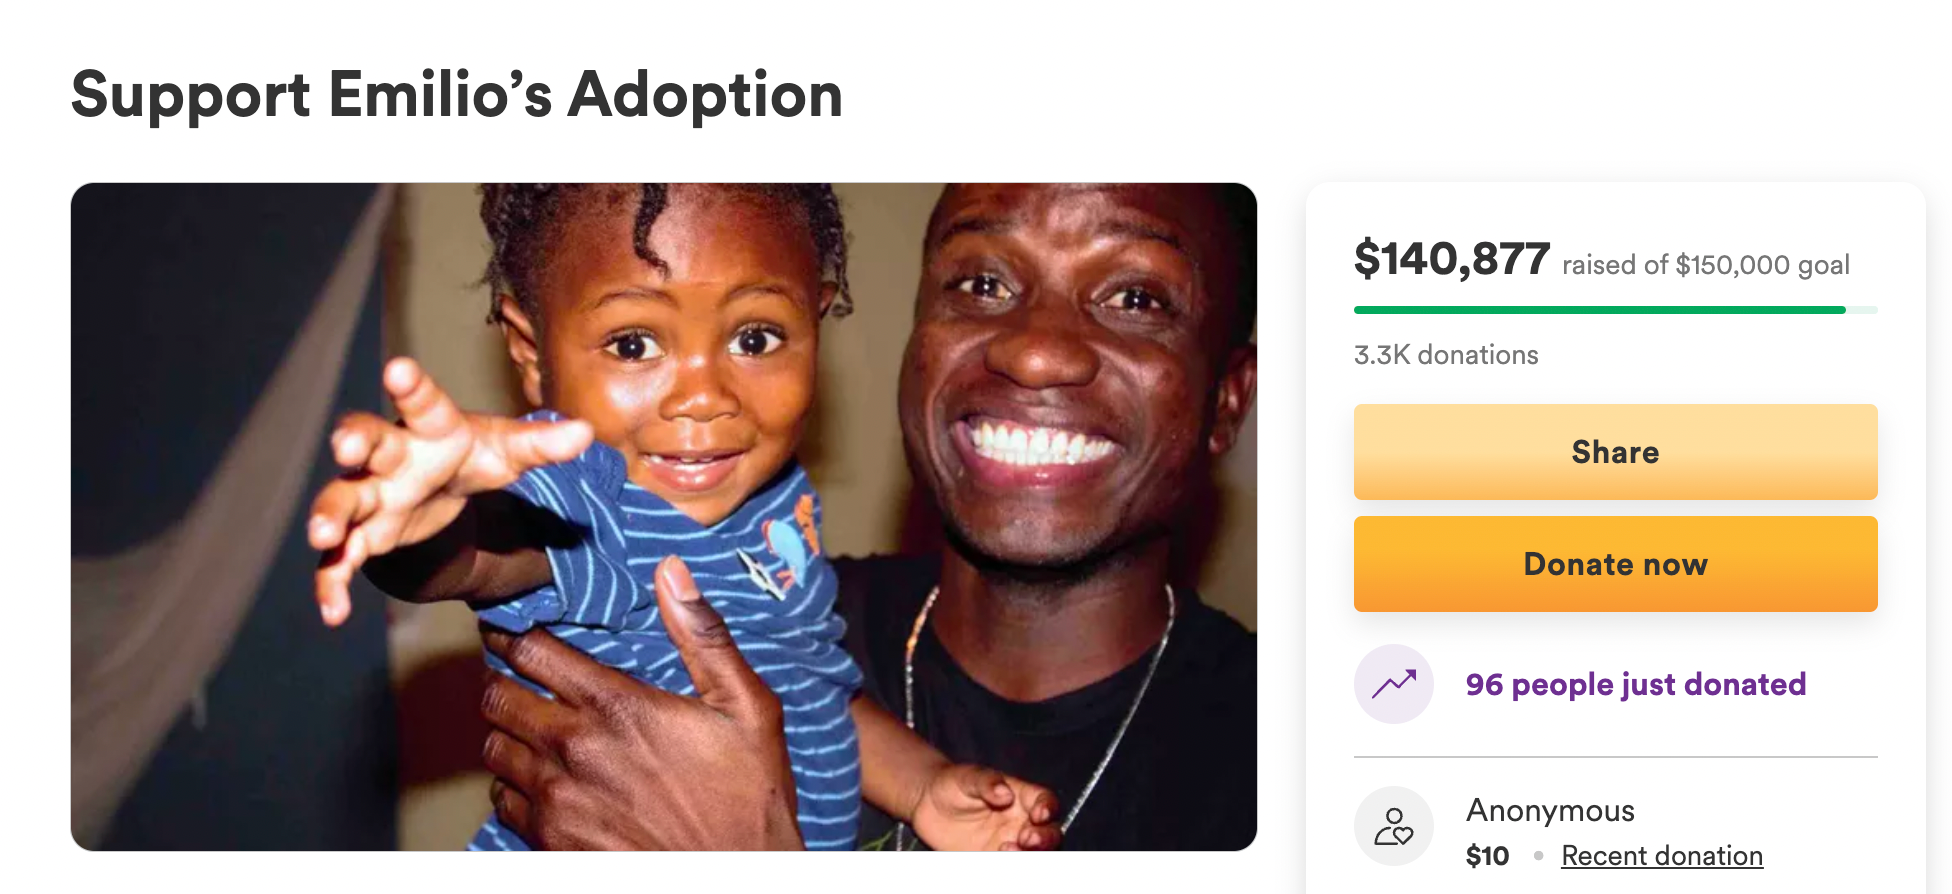 Thanks to the $140,000 raised, Mr Amisial said he will be able officially become Emilio’s father and bring him to the US.